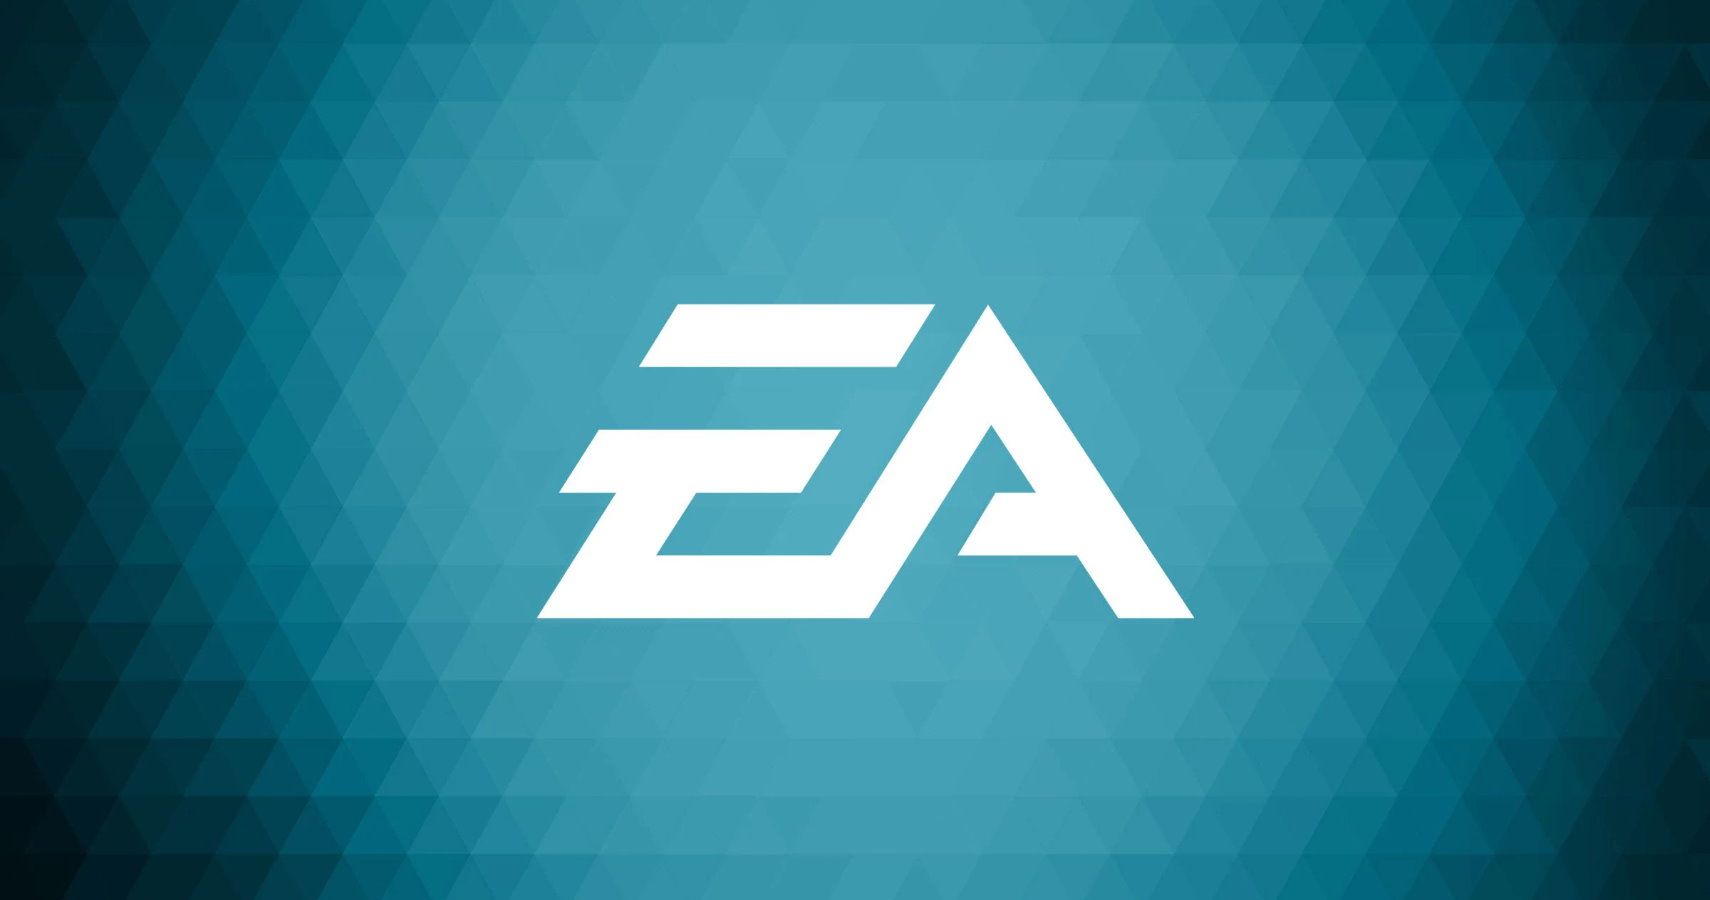 EA Promises A Thorough Investigation Into Sexual Assault Allegations